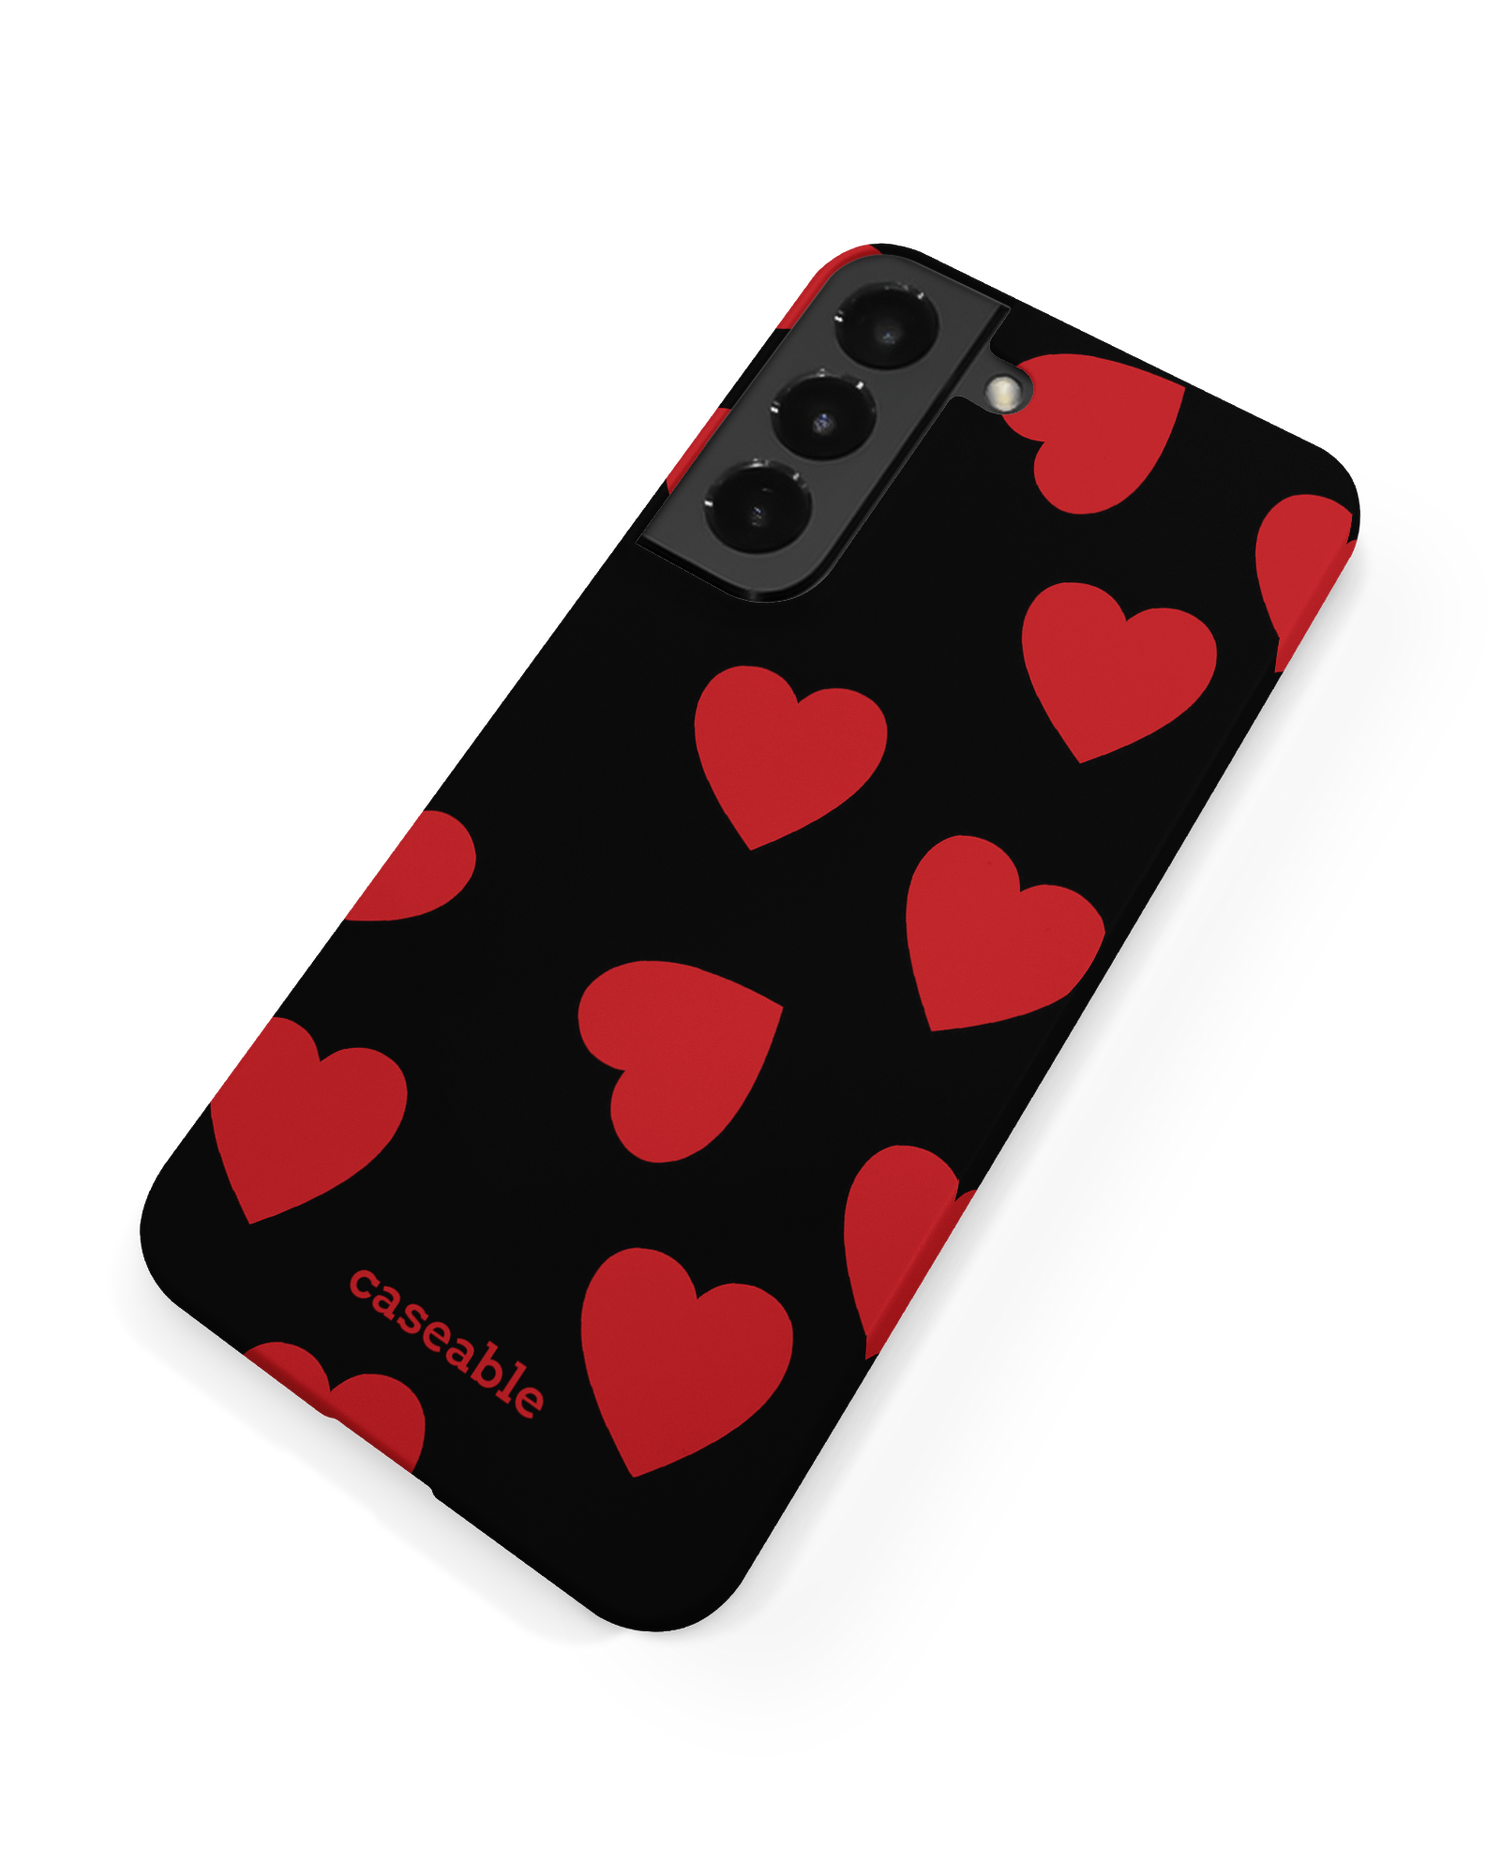 Repeating Hearts Hard Shell Phone Case Samsung Galaxy S22 Plus 5G: Back View